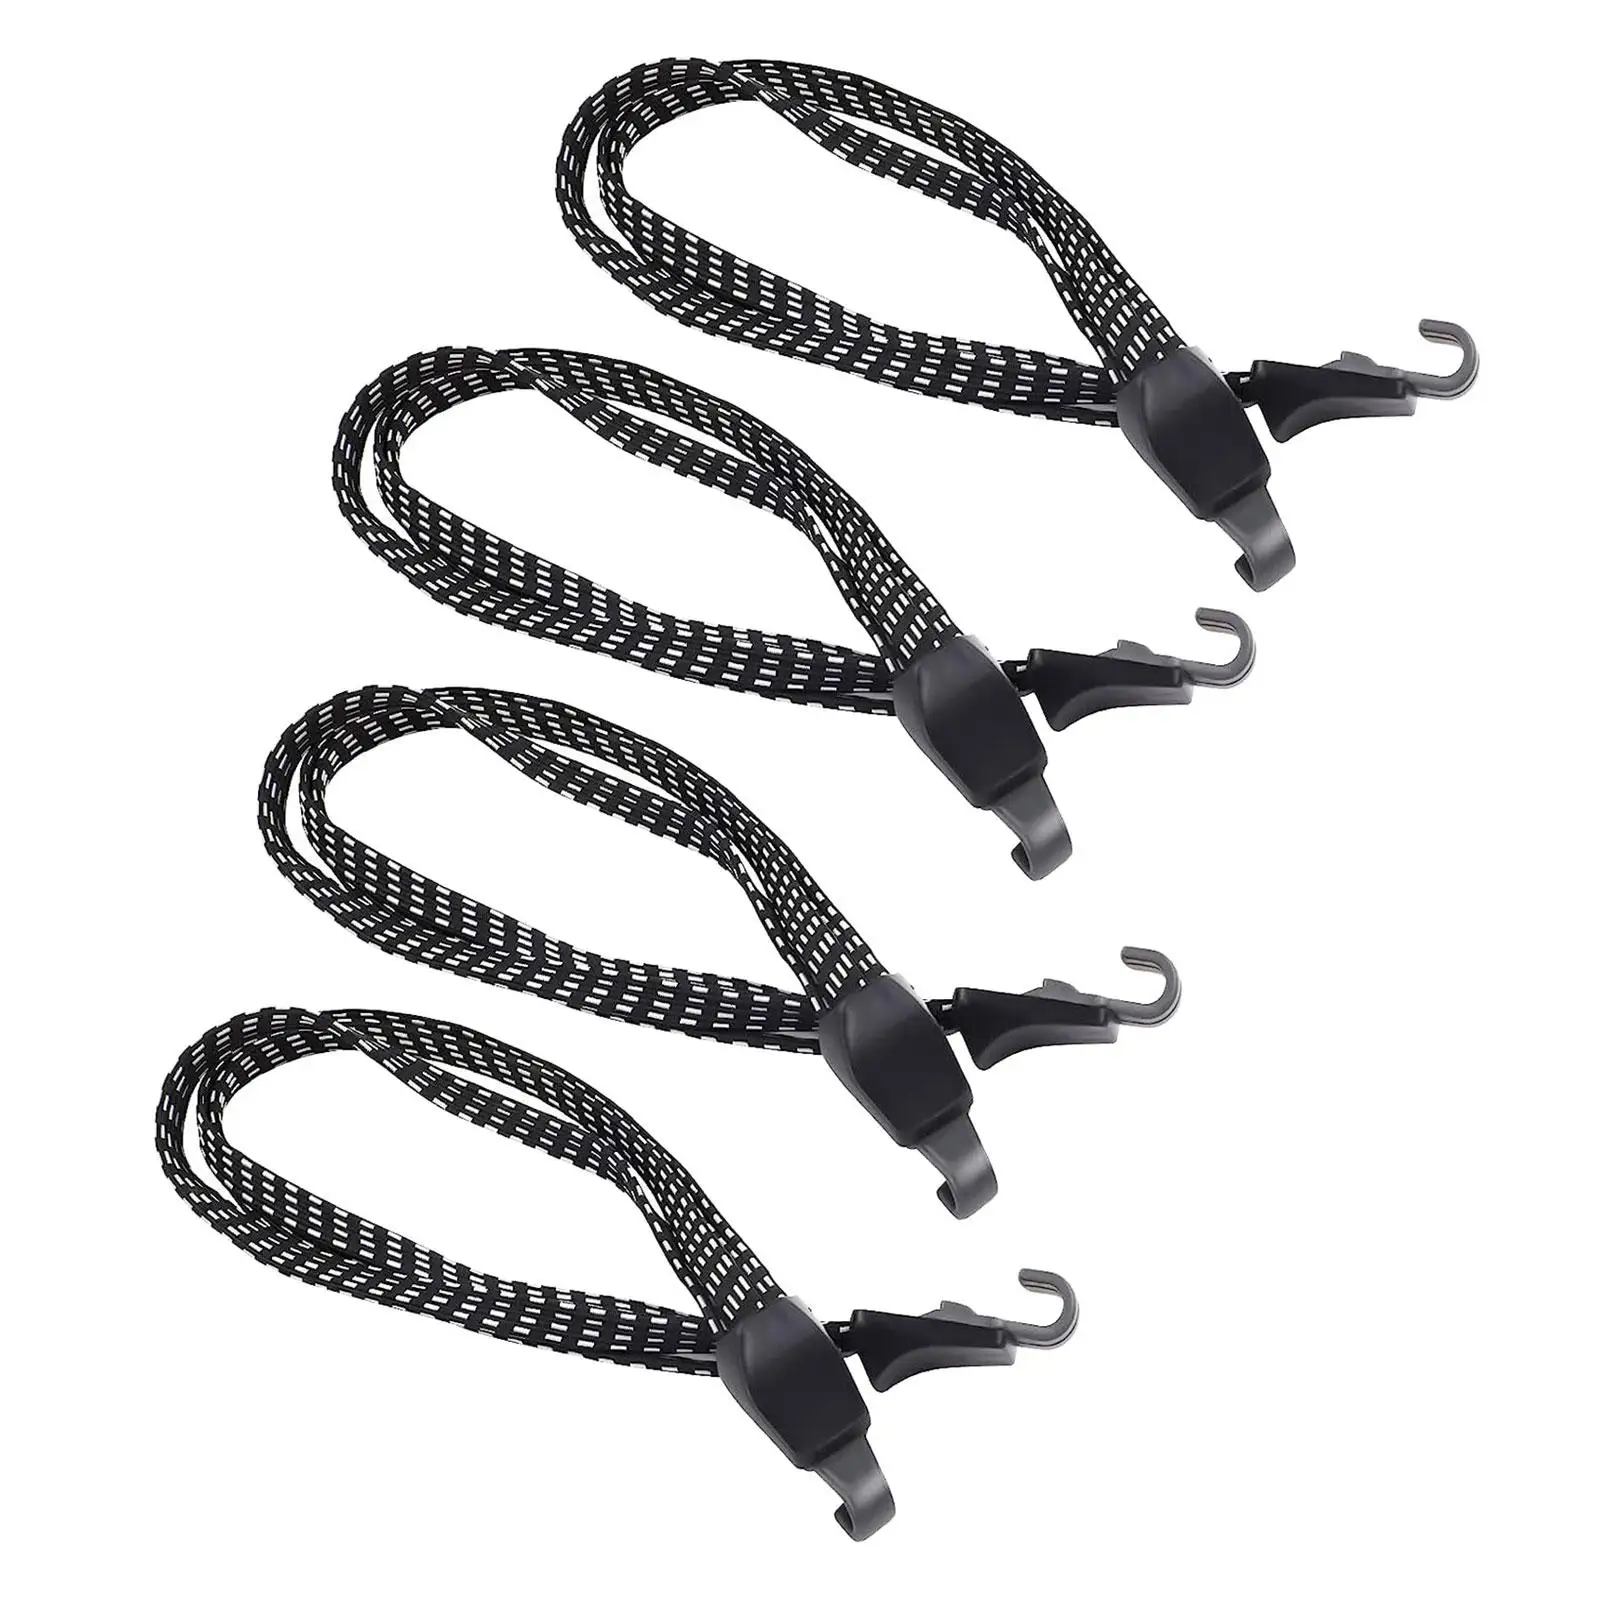 4x Motorcycle Luggage Rack Tie Down Straps for Bicycle Cargo Cart Tie Down